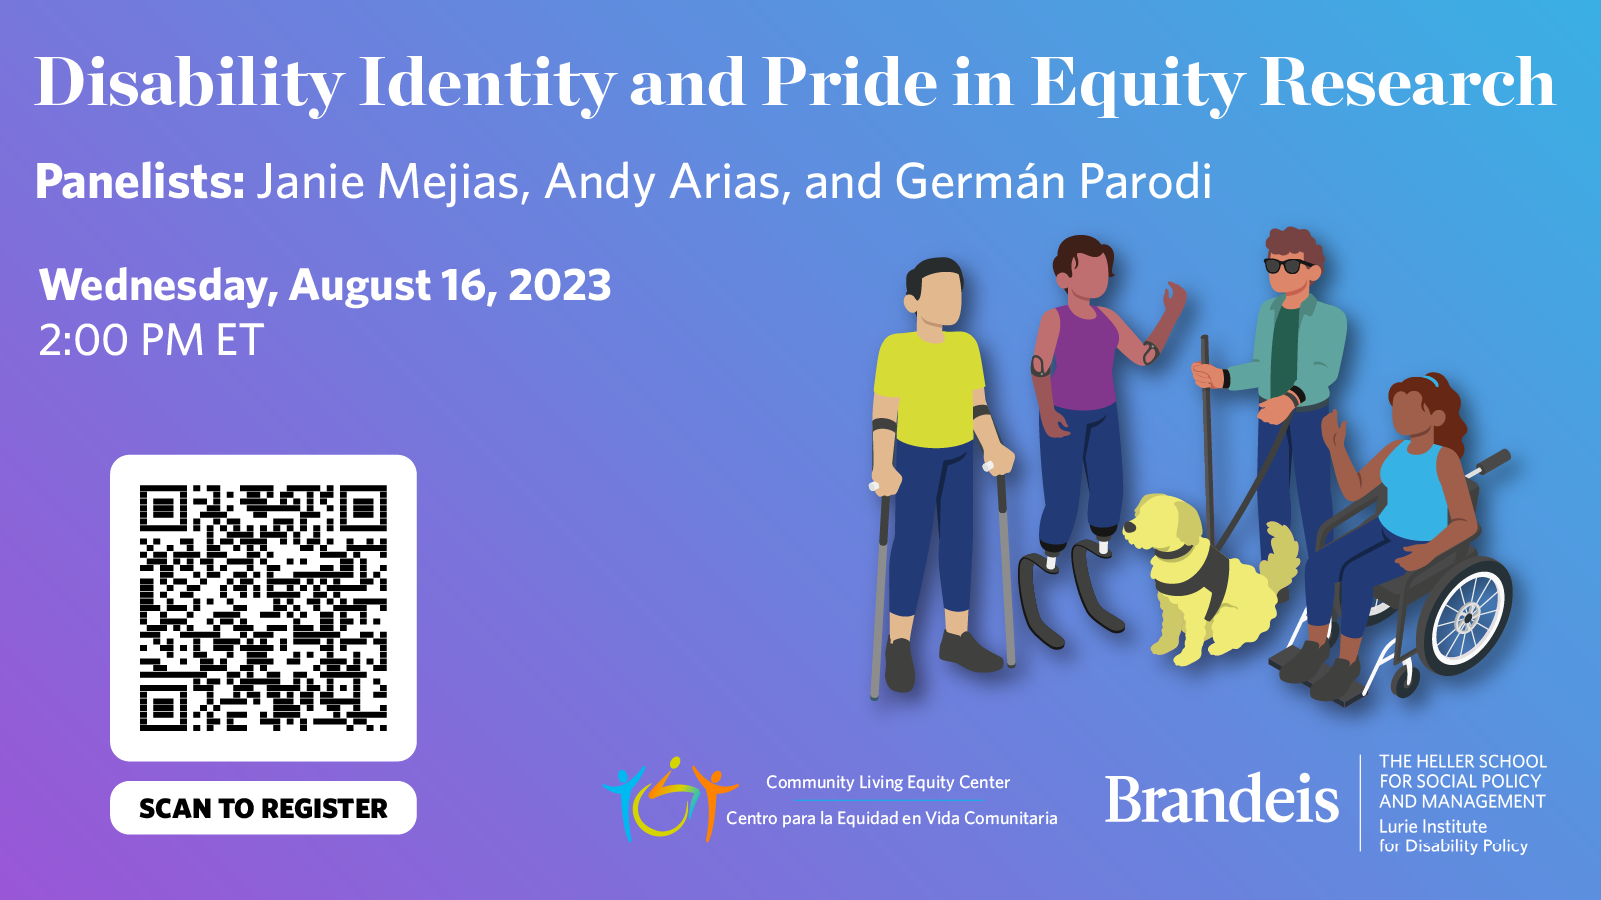 Disability Identity and Pride in Equity Research registration